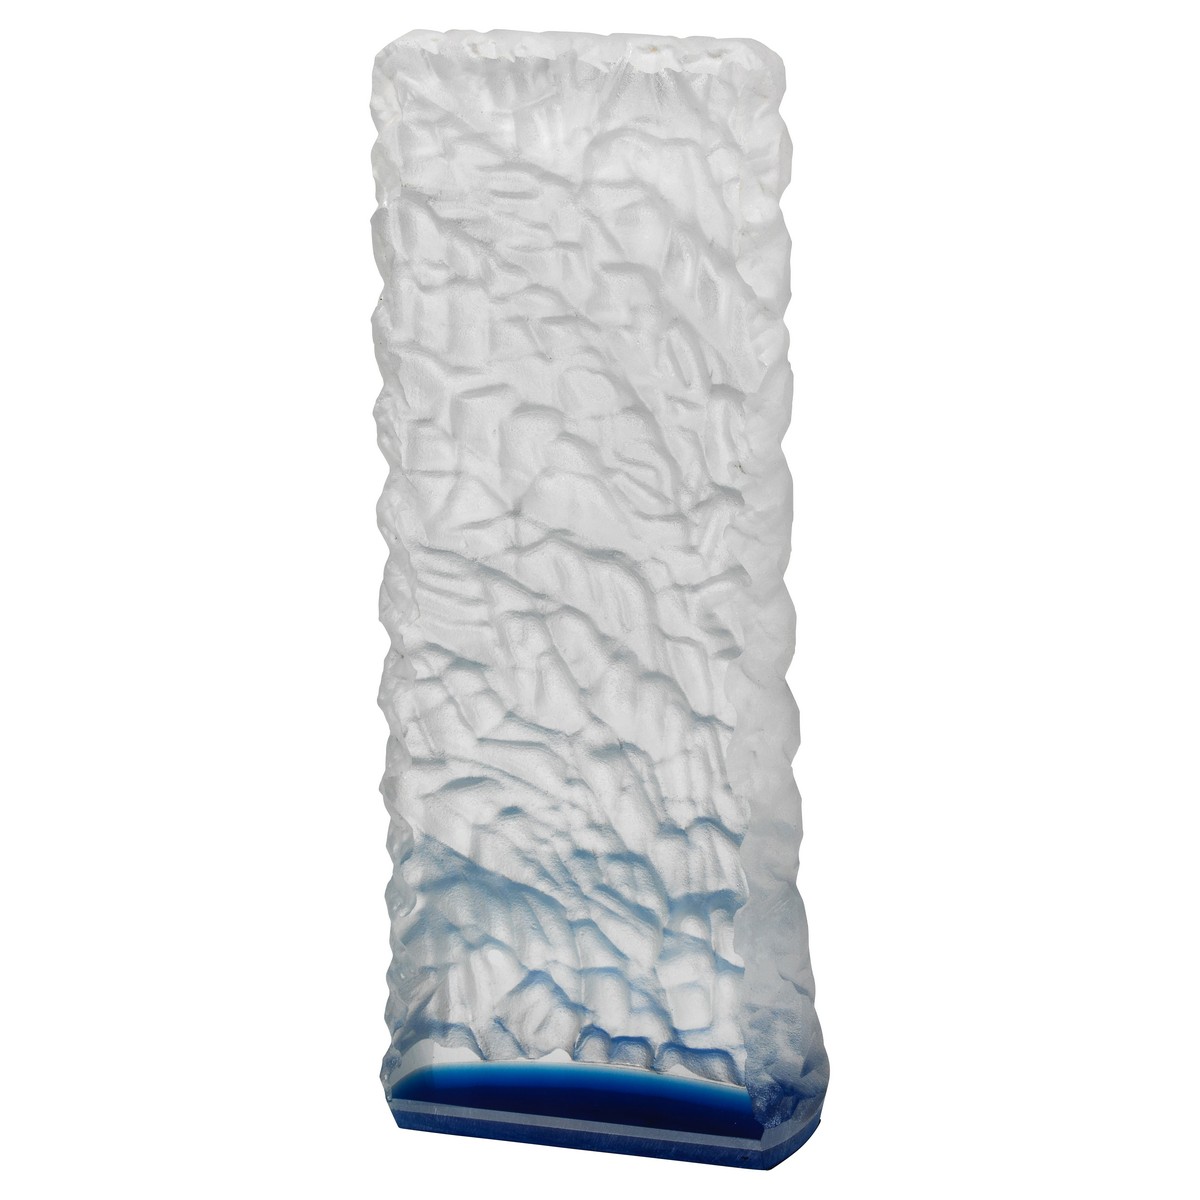 CLEAR/BLUE GLASS ROCK COLUMN (APPROX 25MM THICK)